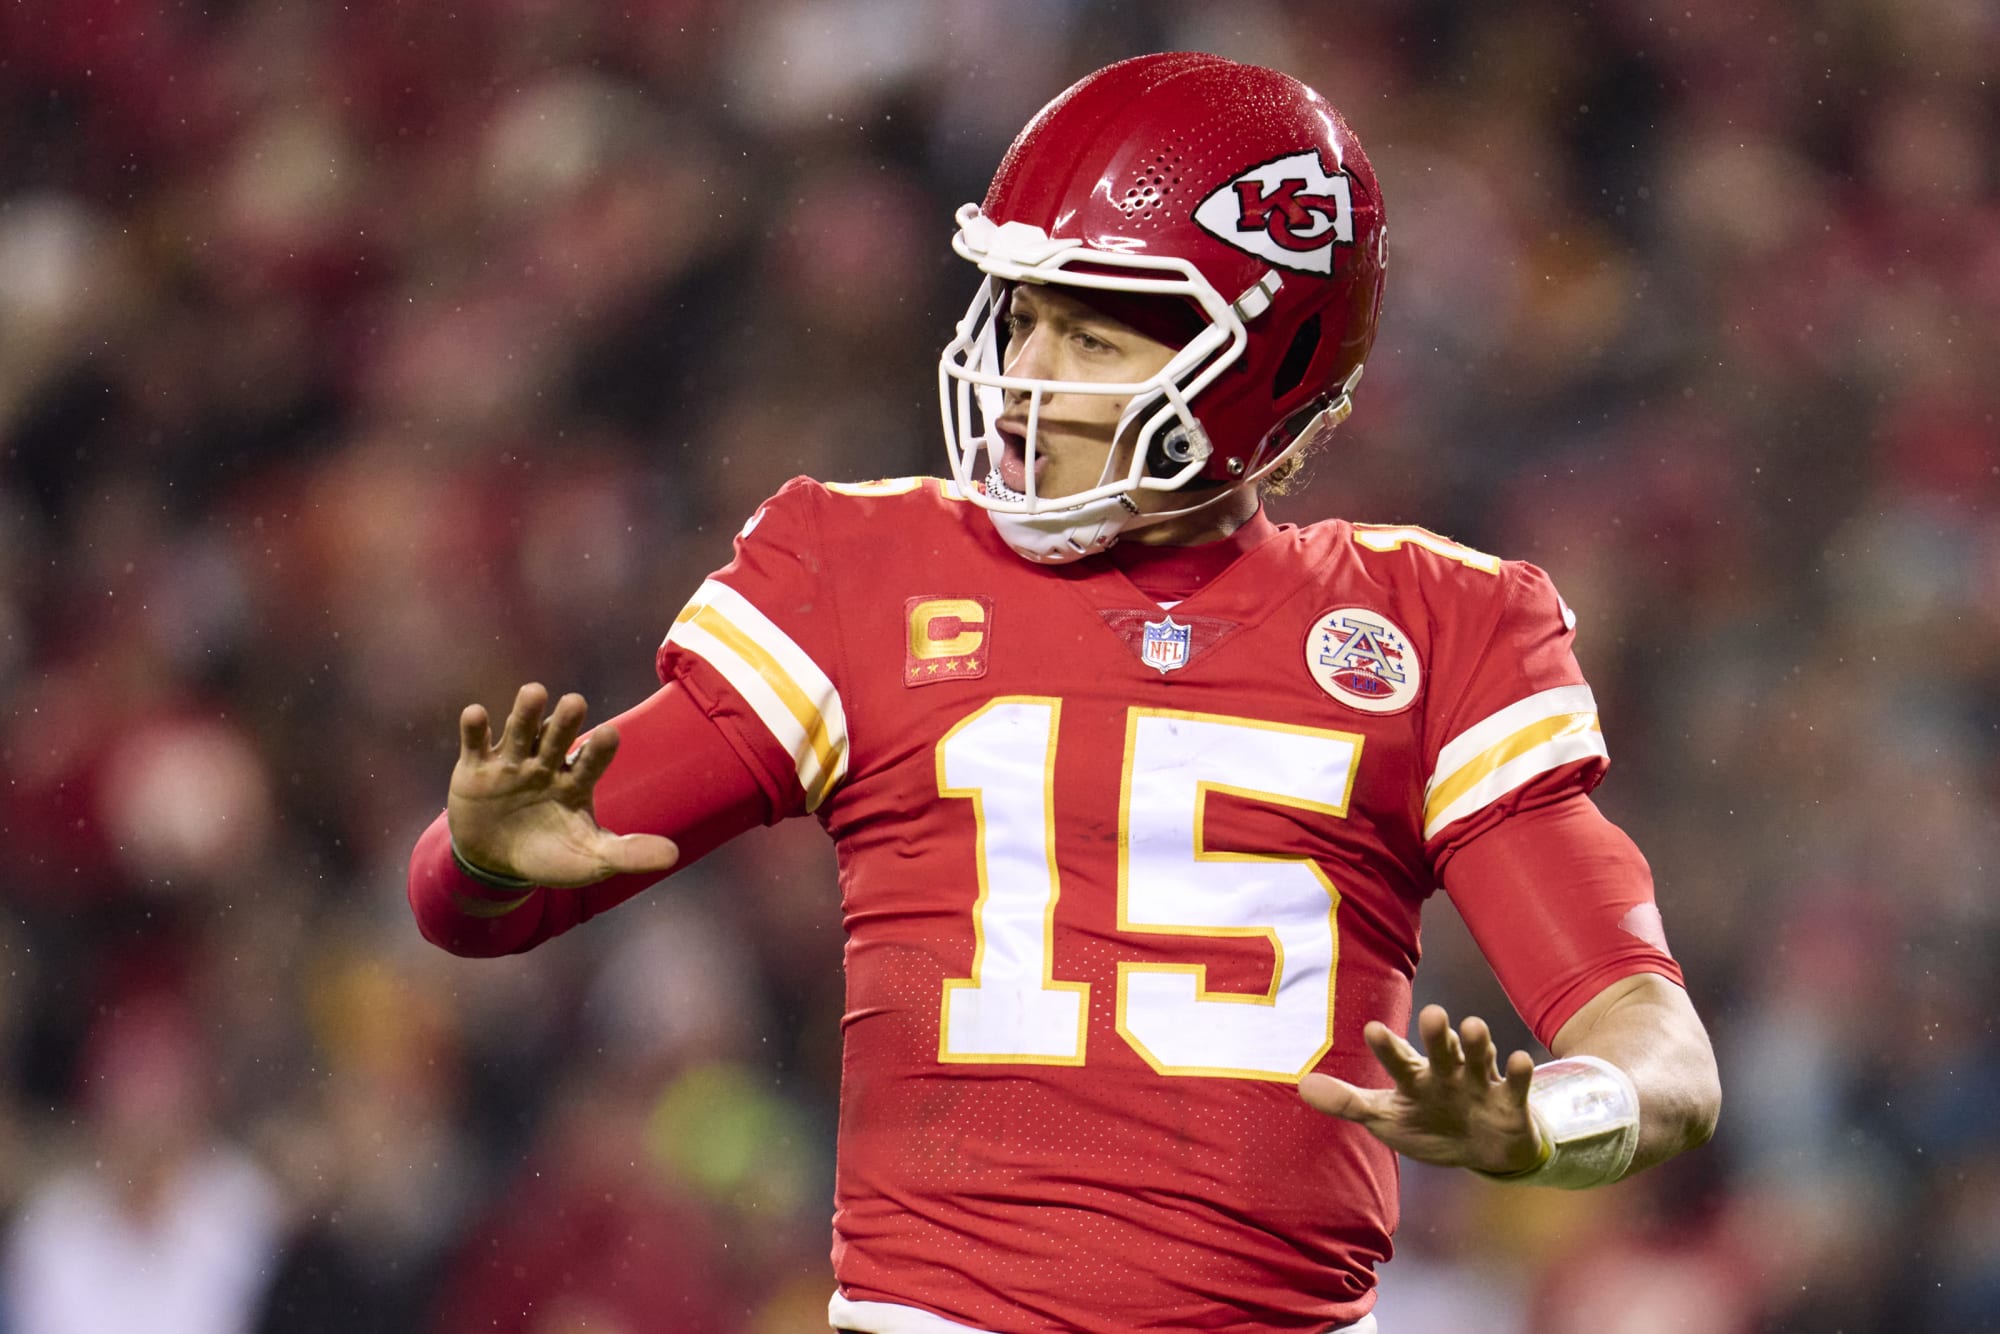 Patrick Mahomes picked Eagles to win Super Bowl, just not against the Chiefs